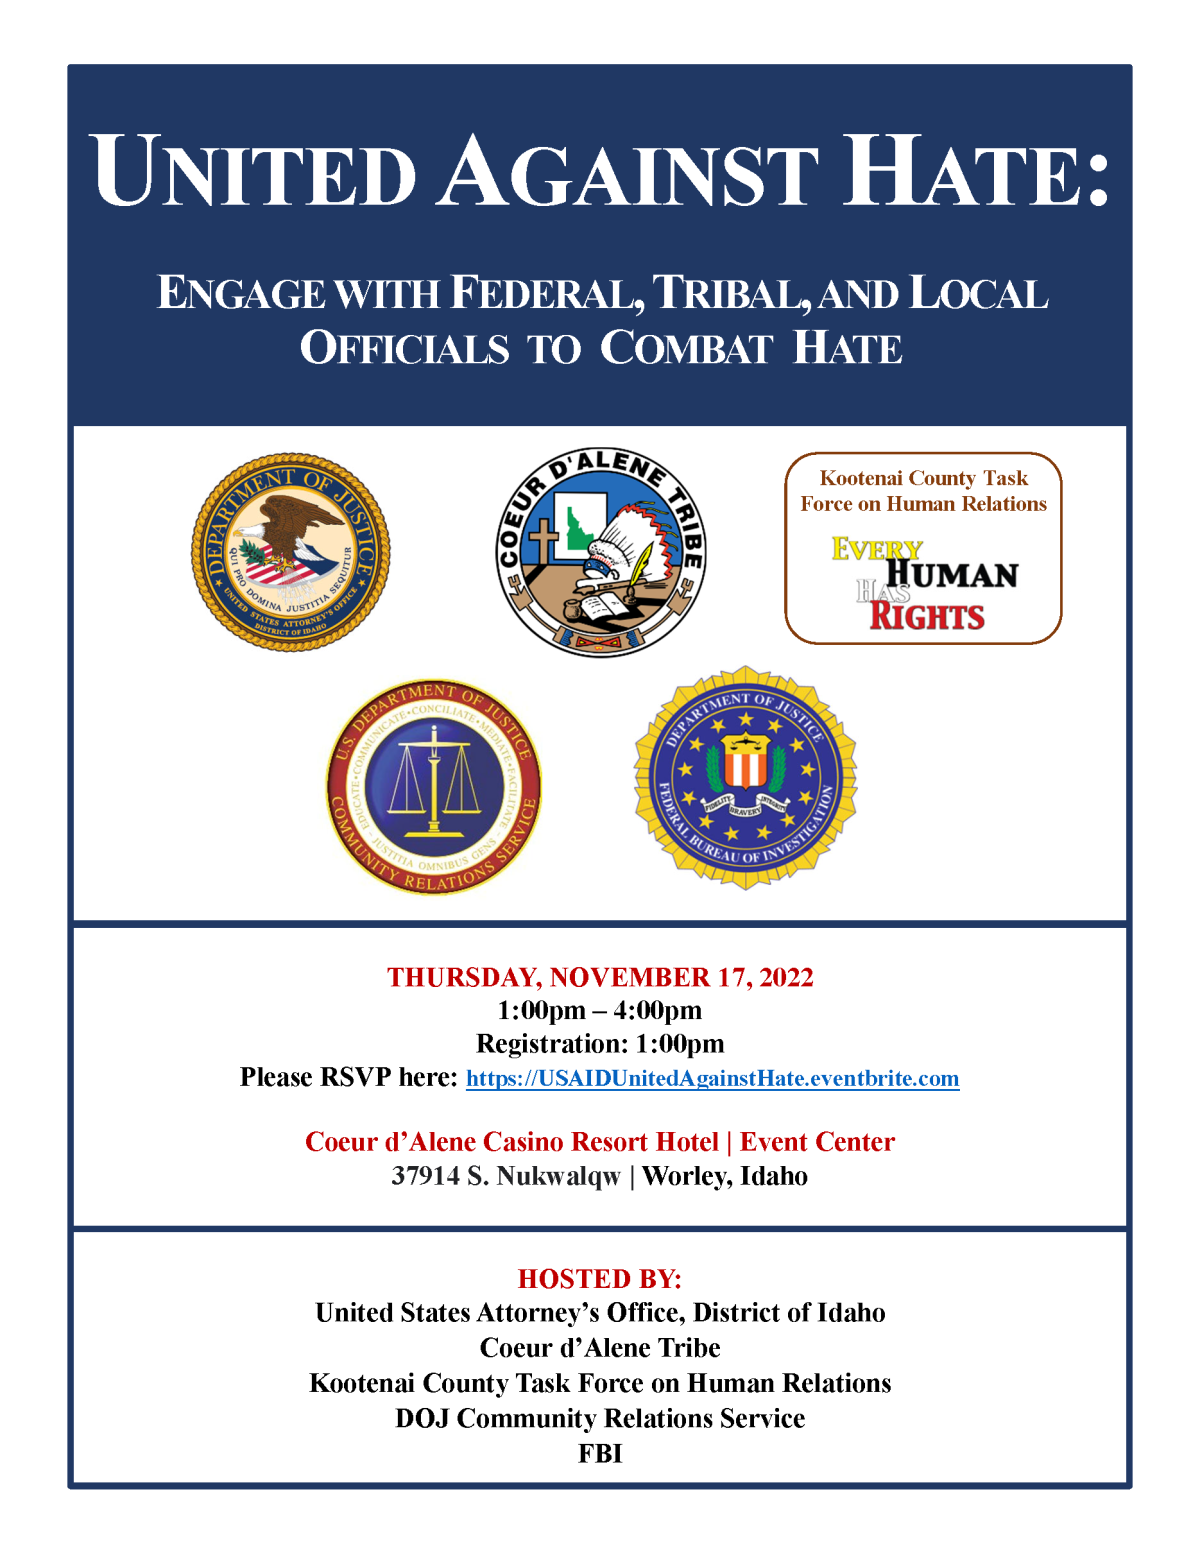 United Against Hate: Engage with Federal, Tribal, and Local Officials to Combat Hate